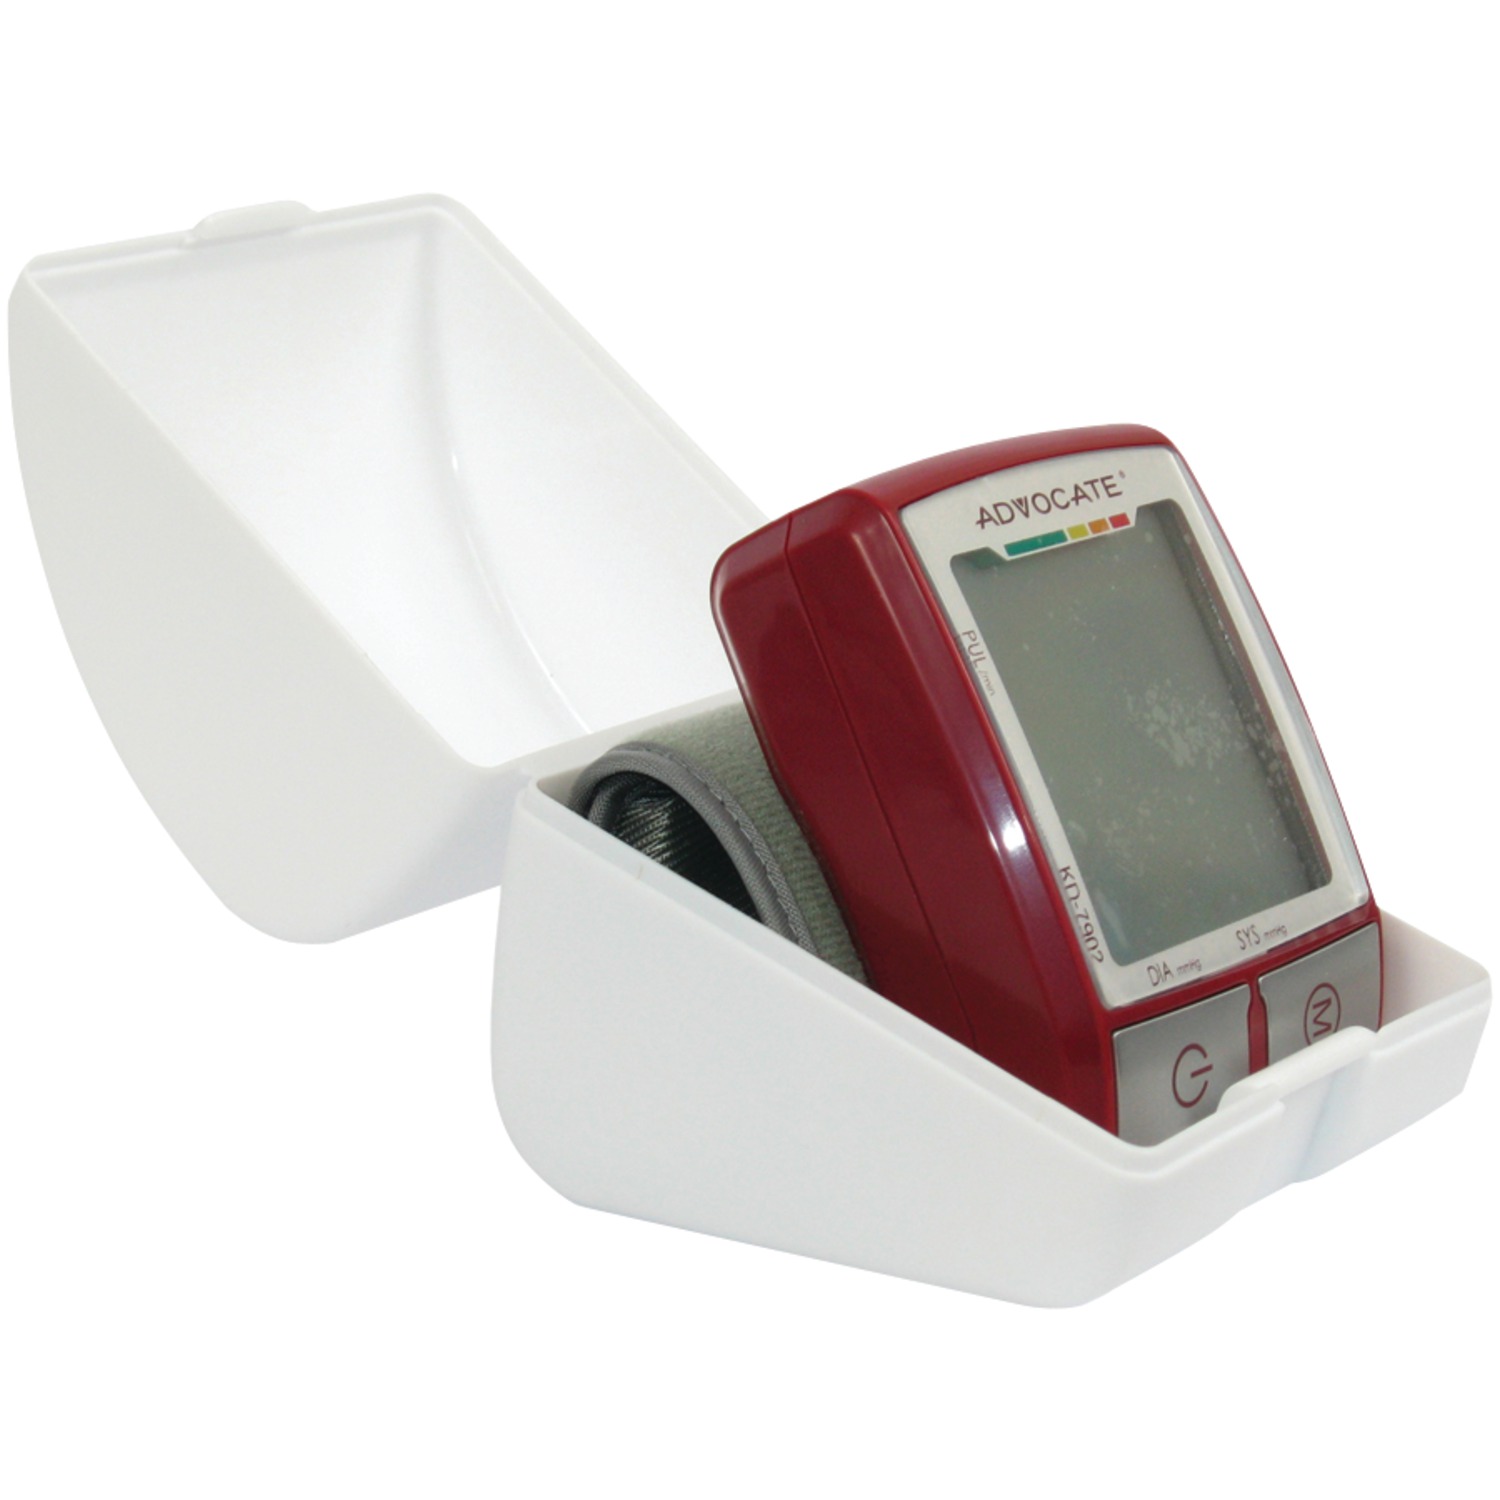 ADVOCATE KD-7902 Wrist Blood Pressure Monitor with Color Indicator - image 3 of 4